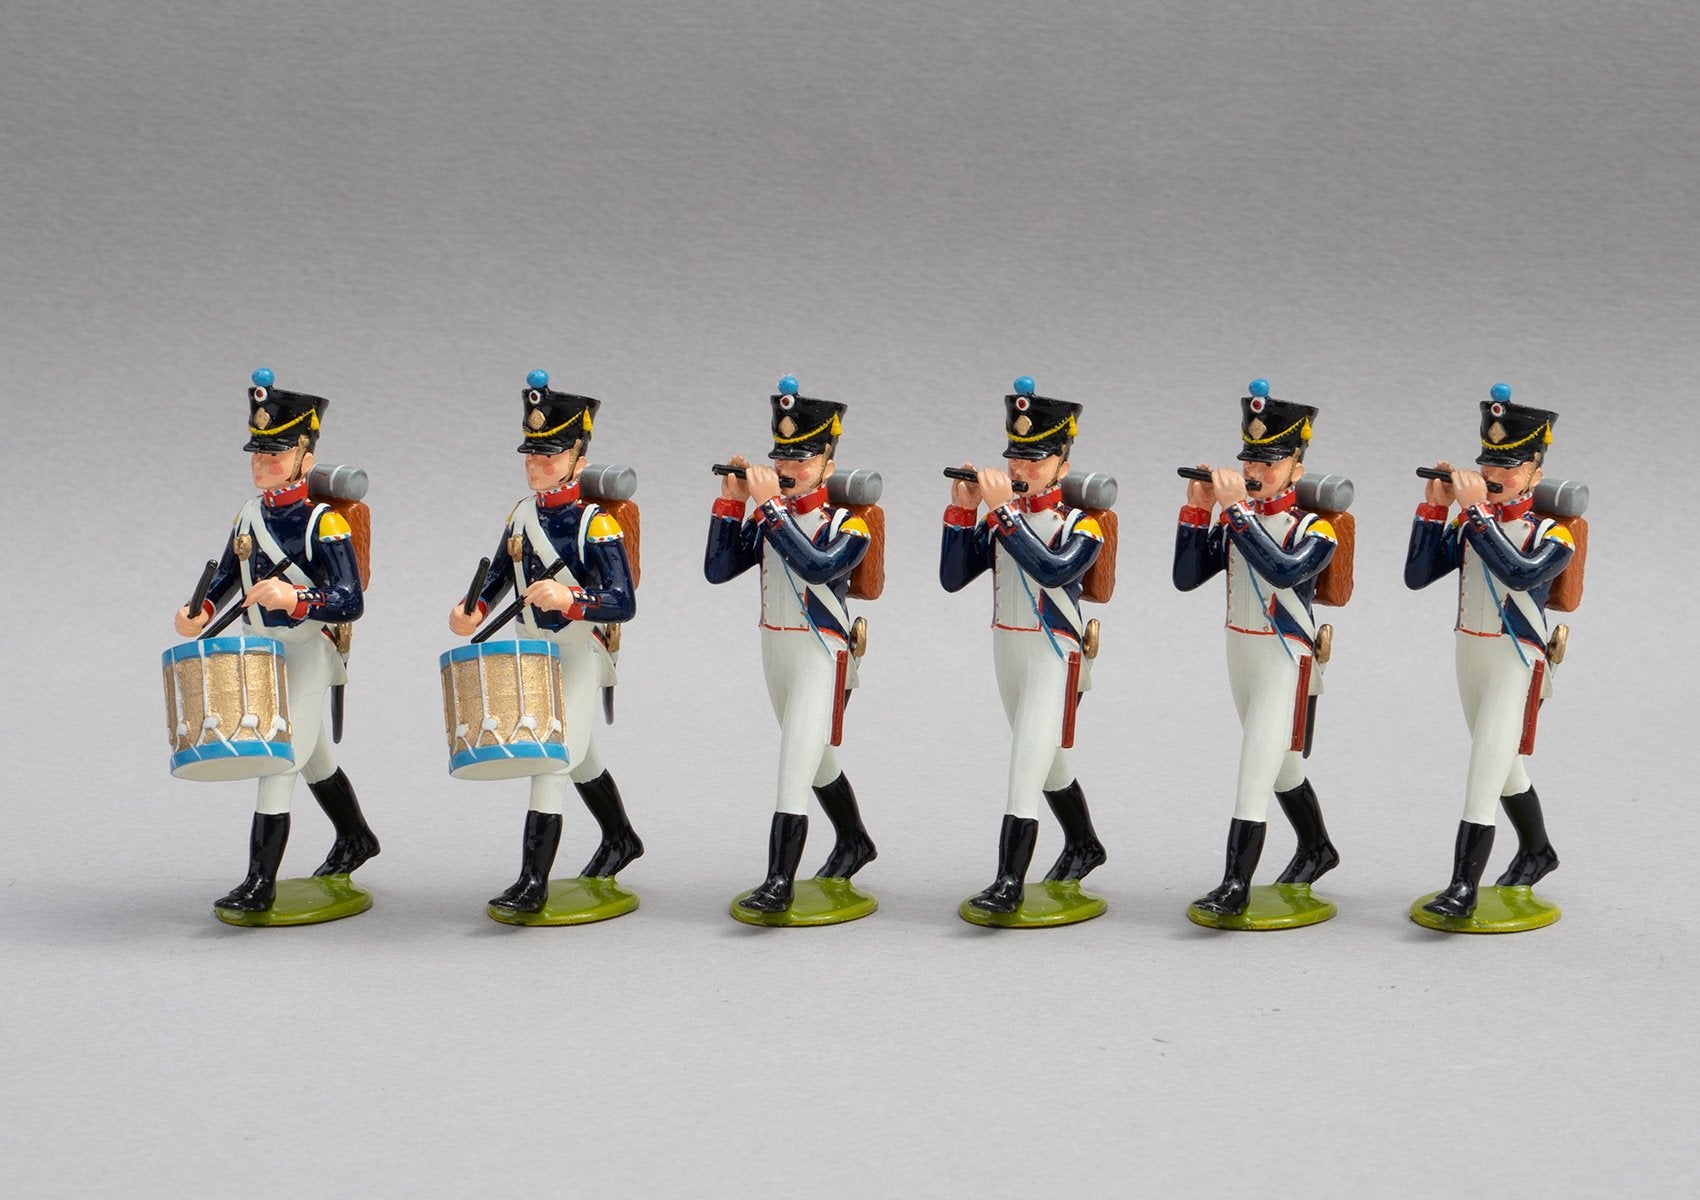 Set 138/2 French Line Infantry Head of Column | French Infantry | Napoleonic Wars | Head of Column, four fifes and two drums | Waterloo | © Imperial Productions | Sculpt by David Cowe